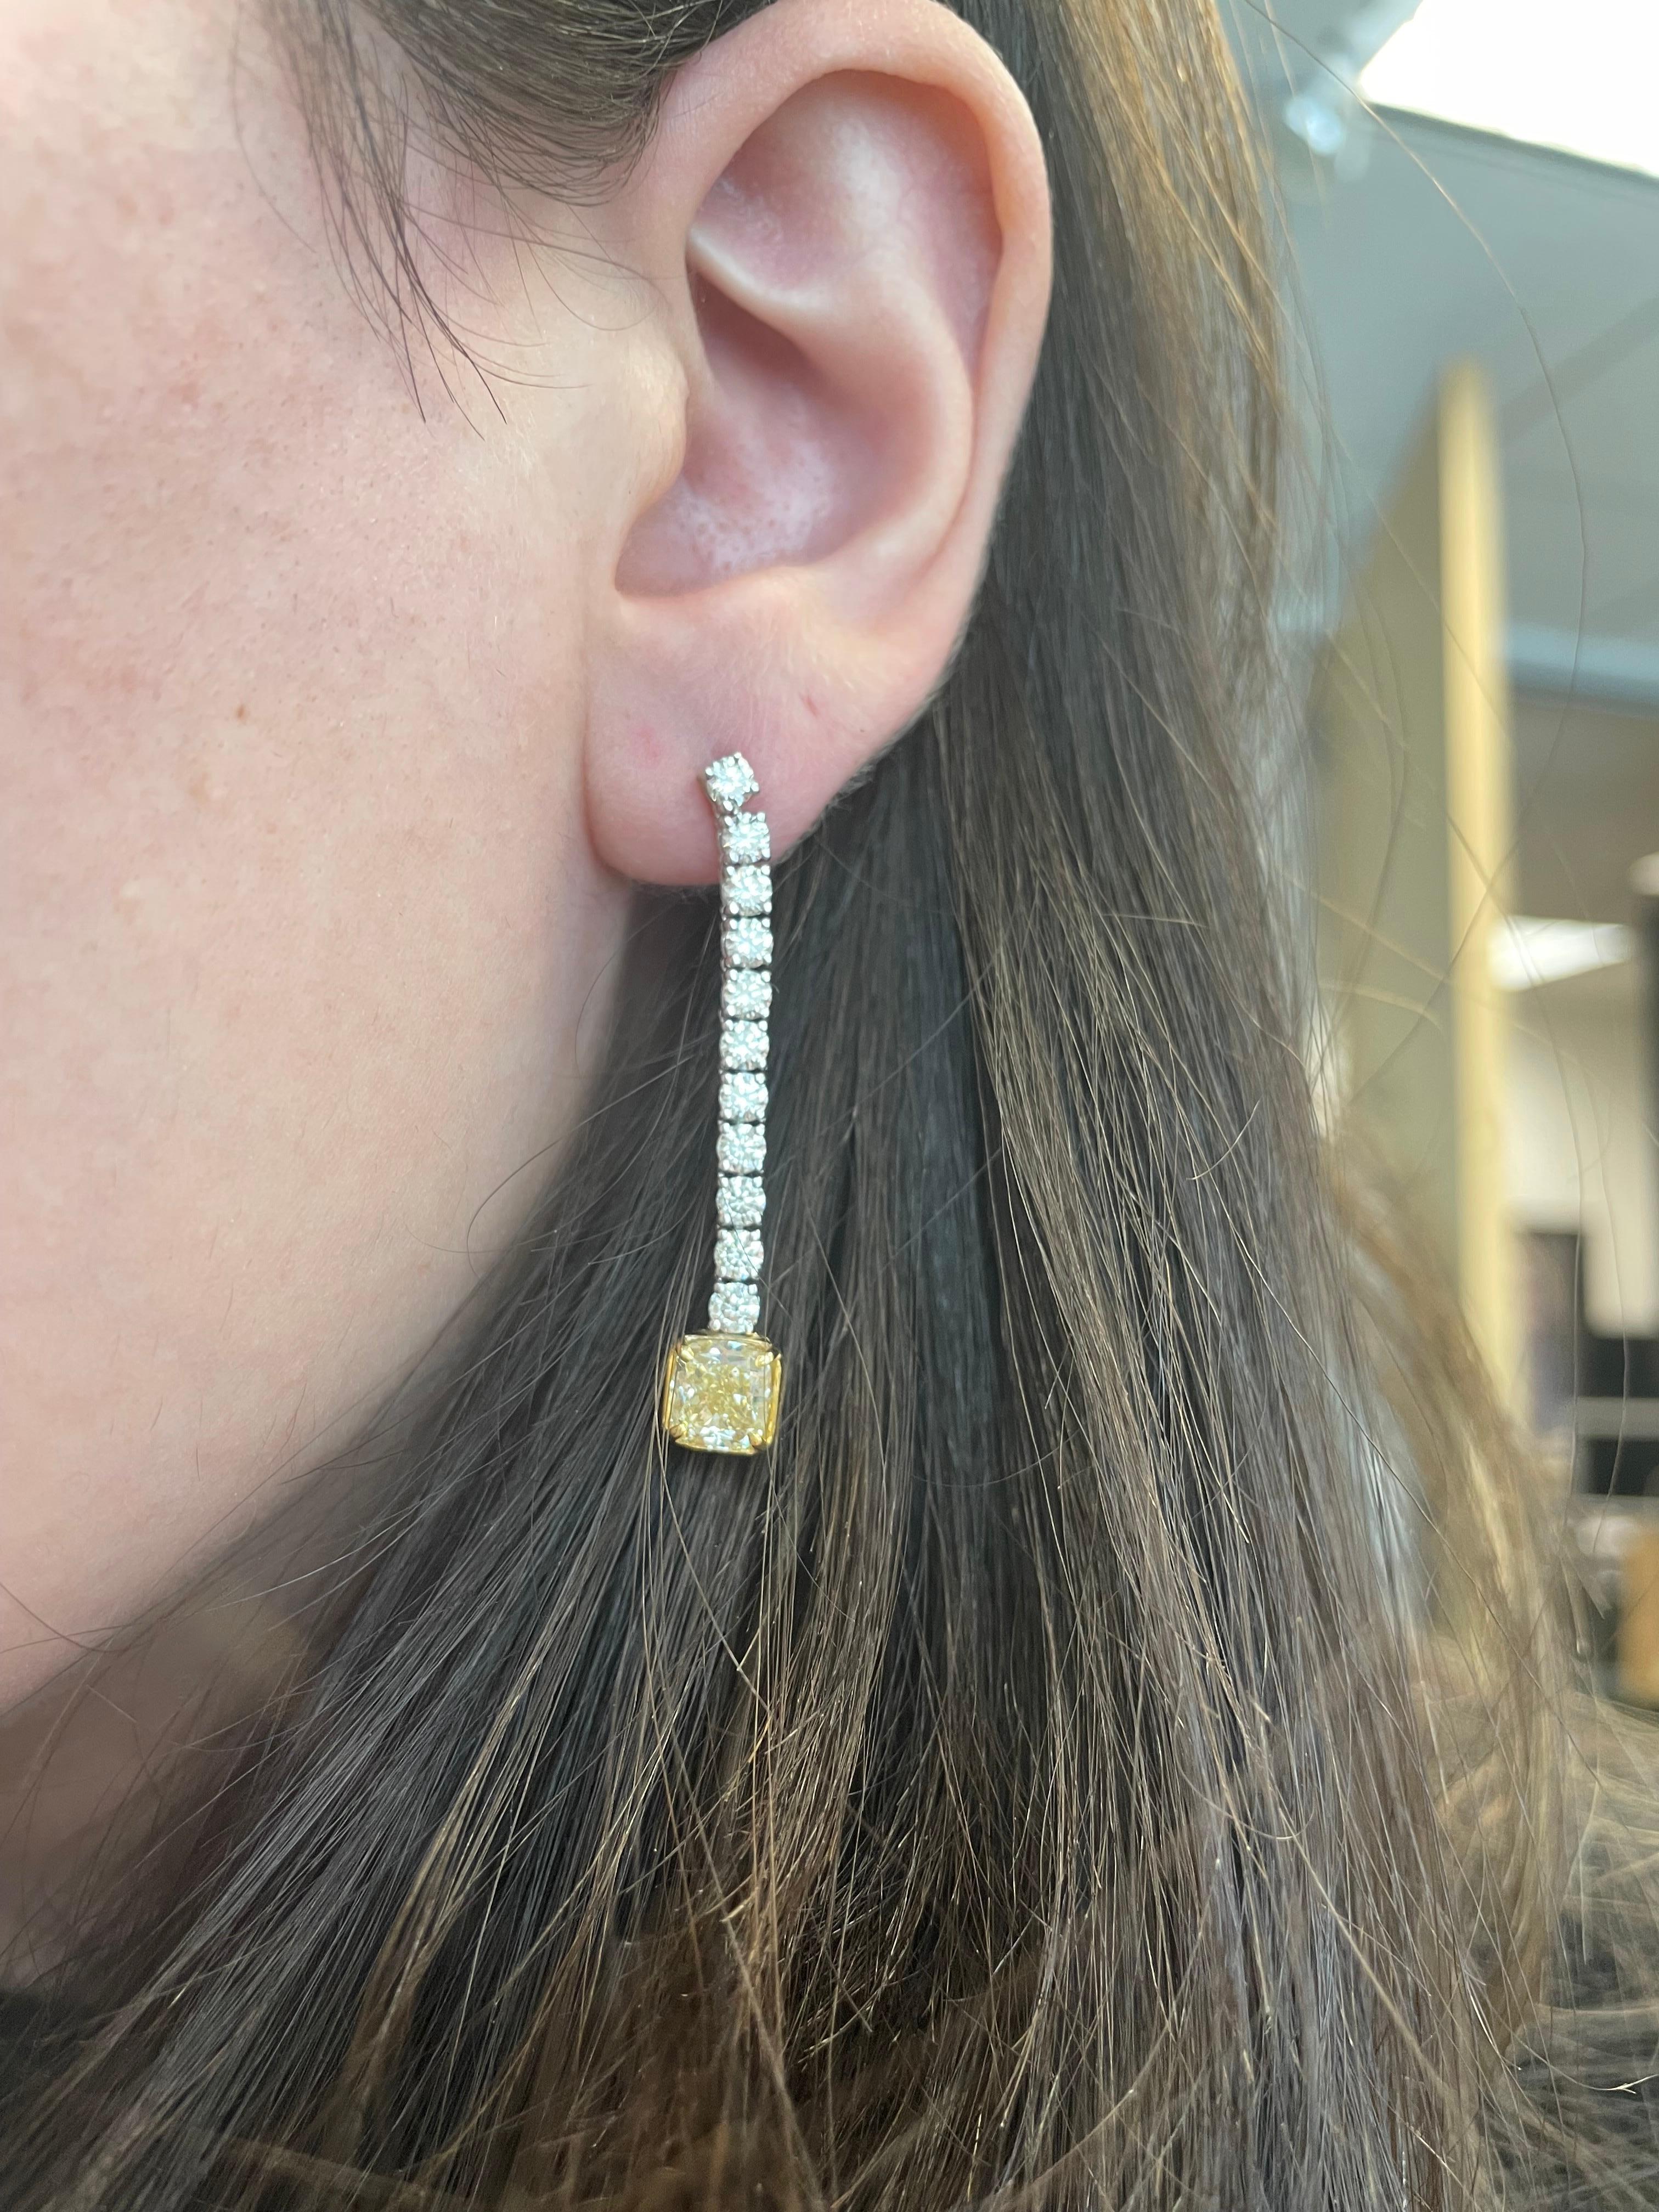 Stunning dangling diamond earring, each center stone GIA certified with “fancy yellow look”
Two matching center cushion diamonds 3.00 carats total. One stone YX color grade and ther other WX color grade. One stone VS1 clarity grade and the other SI1